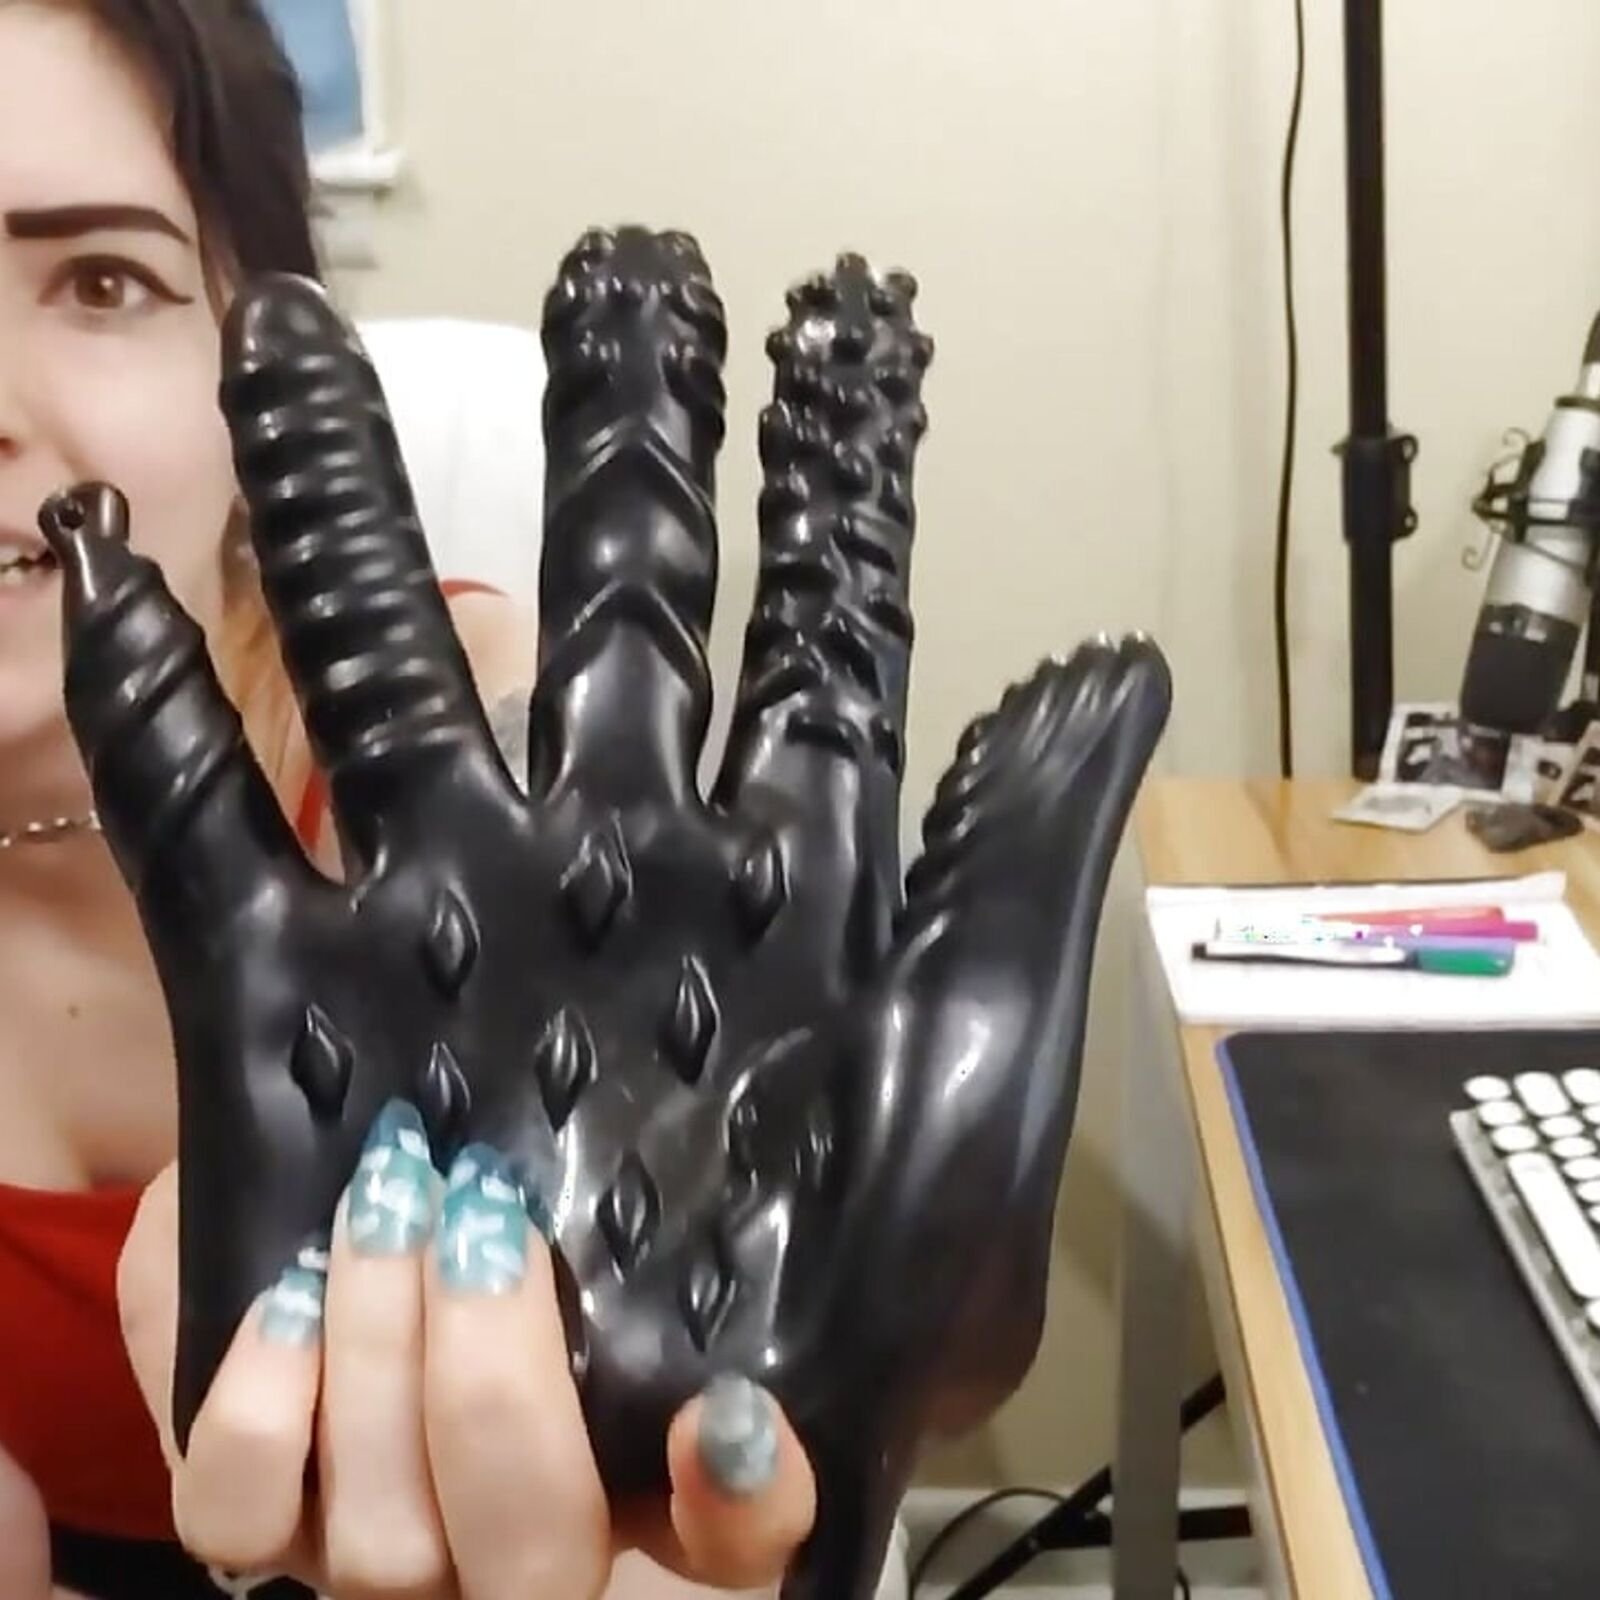 trying out a dildo glove